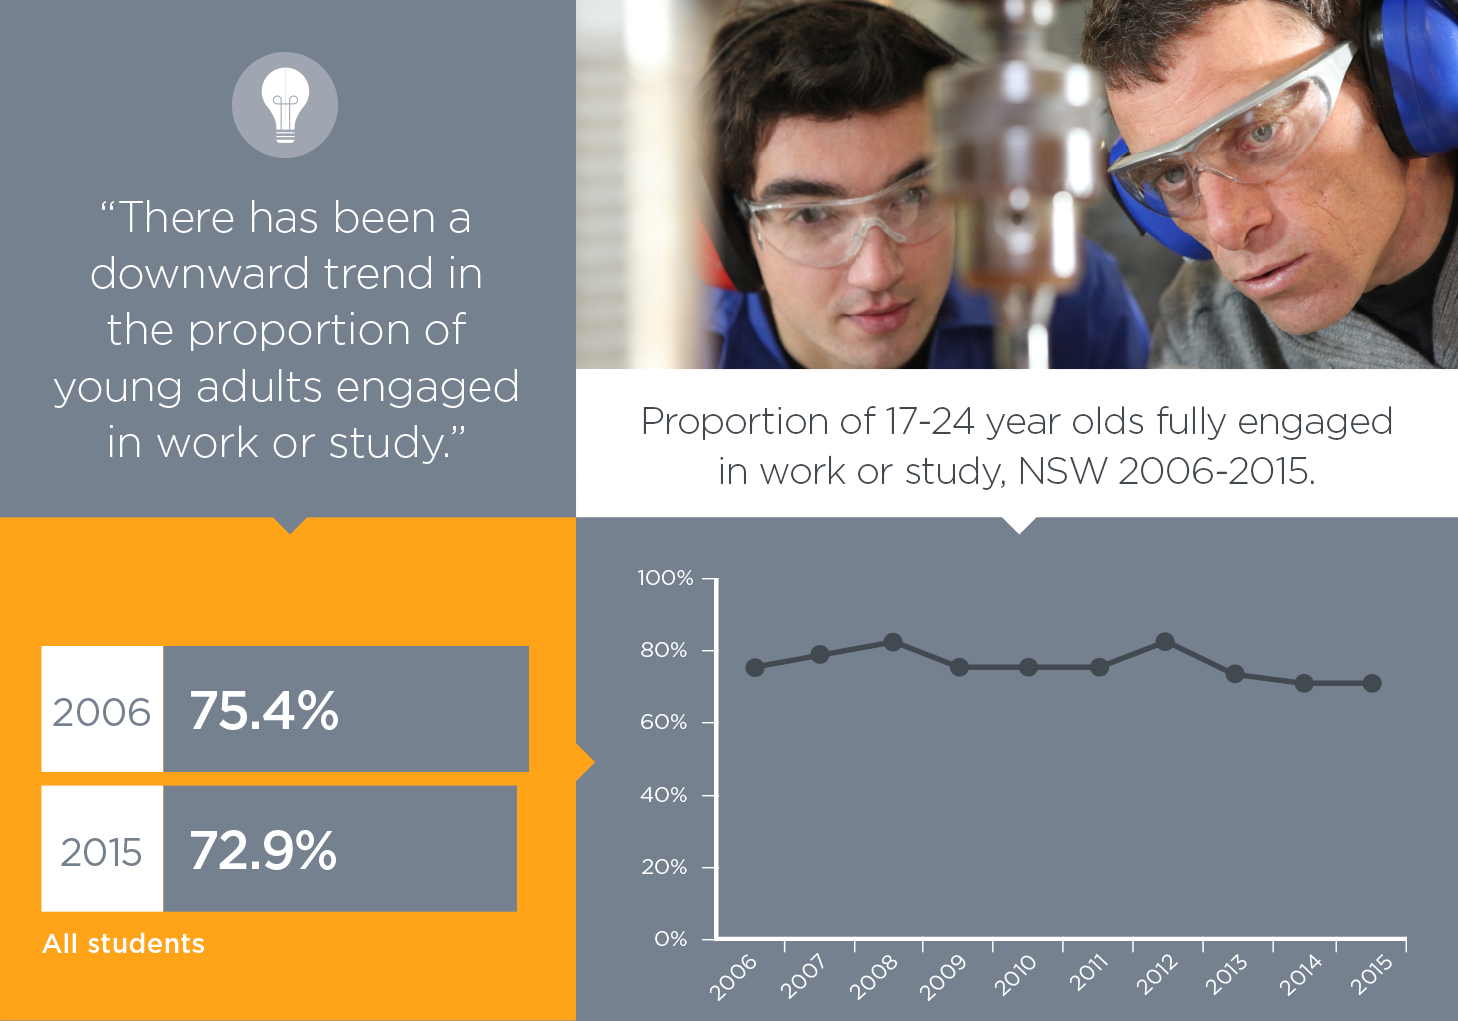 There has been a downward trend in the proportion of 17 to 24 year olds fully engaged in work or study.